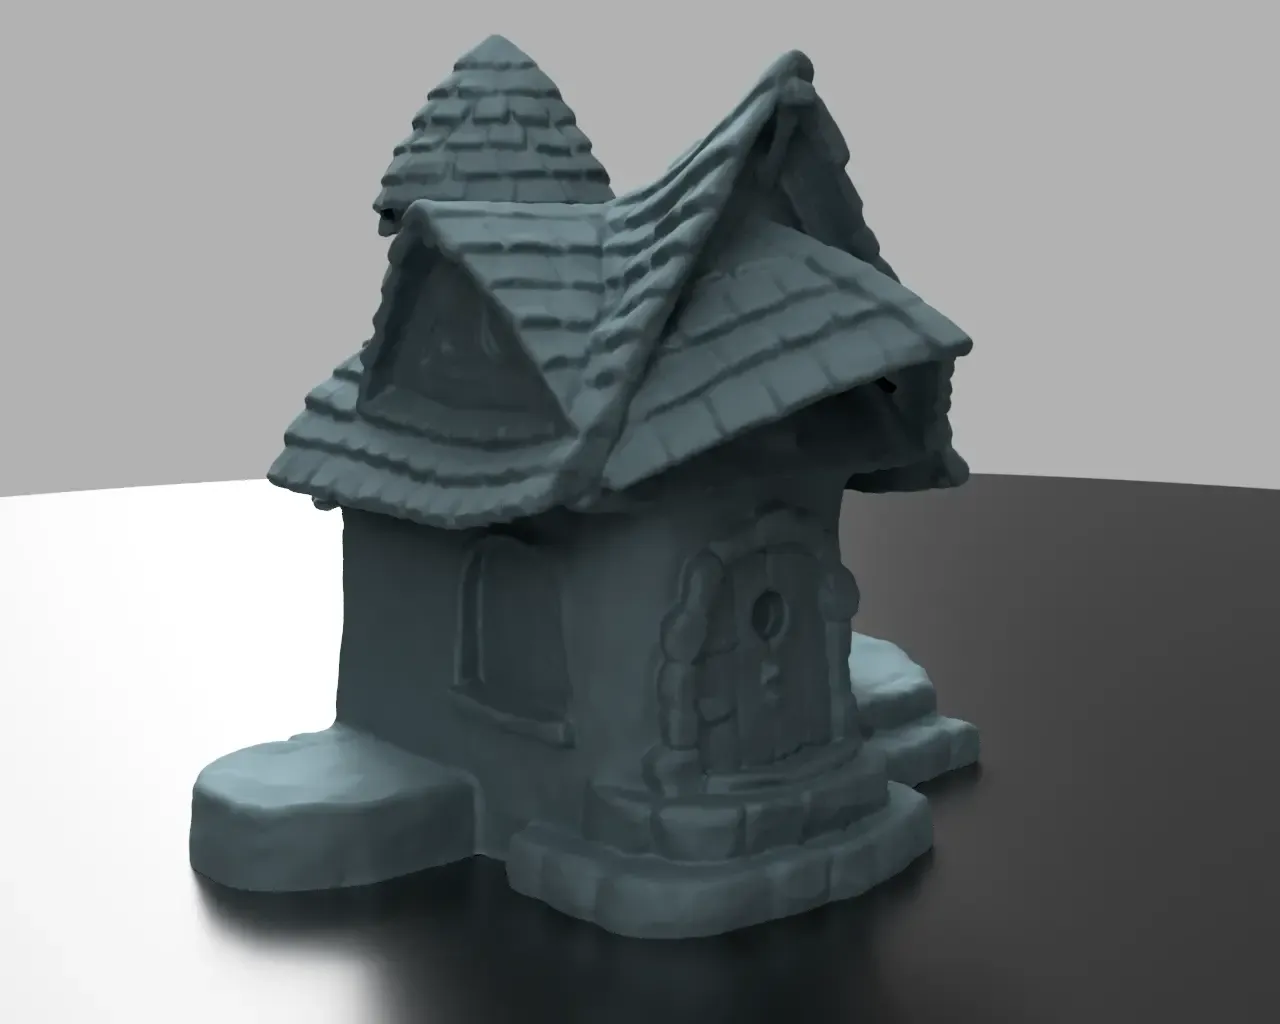 Scan of a house modeled in clay